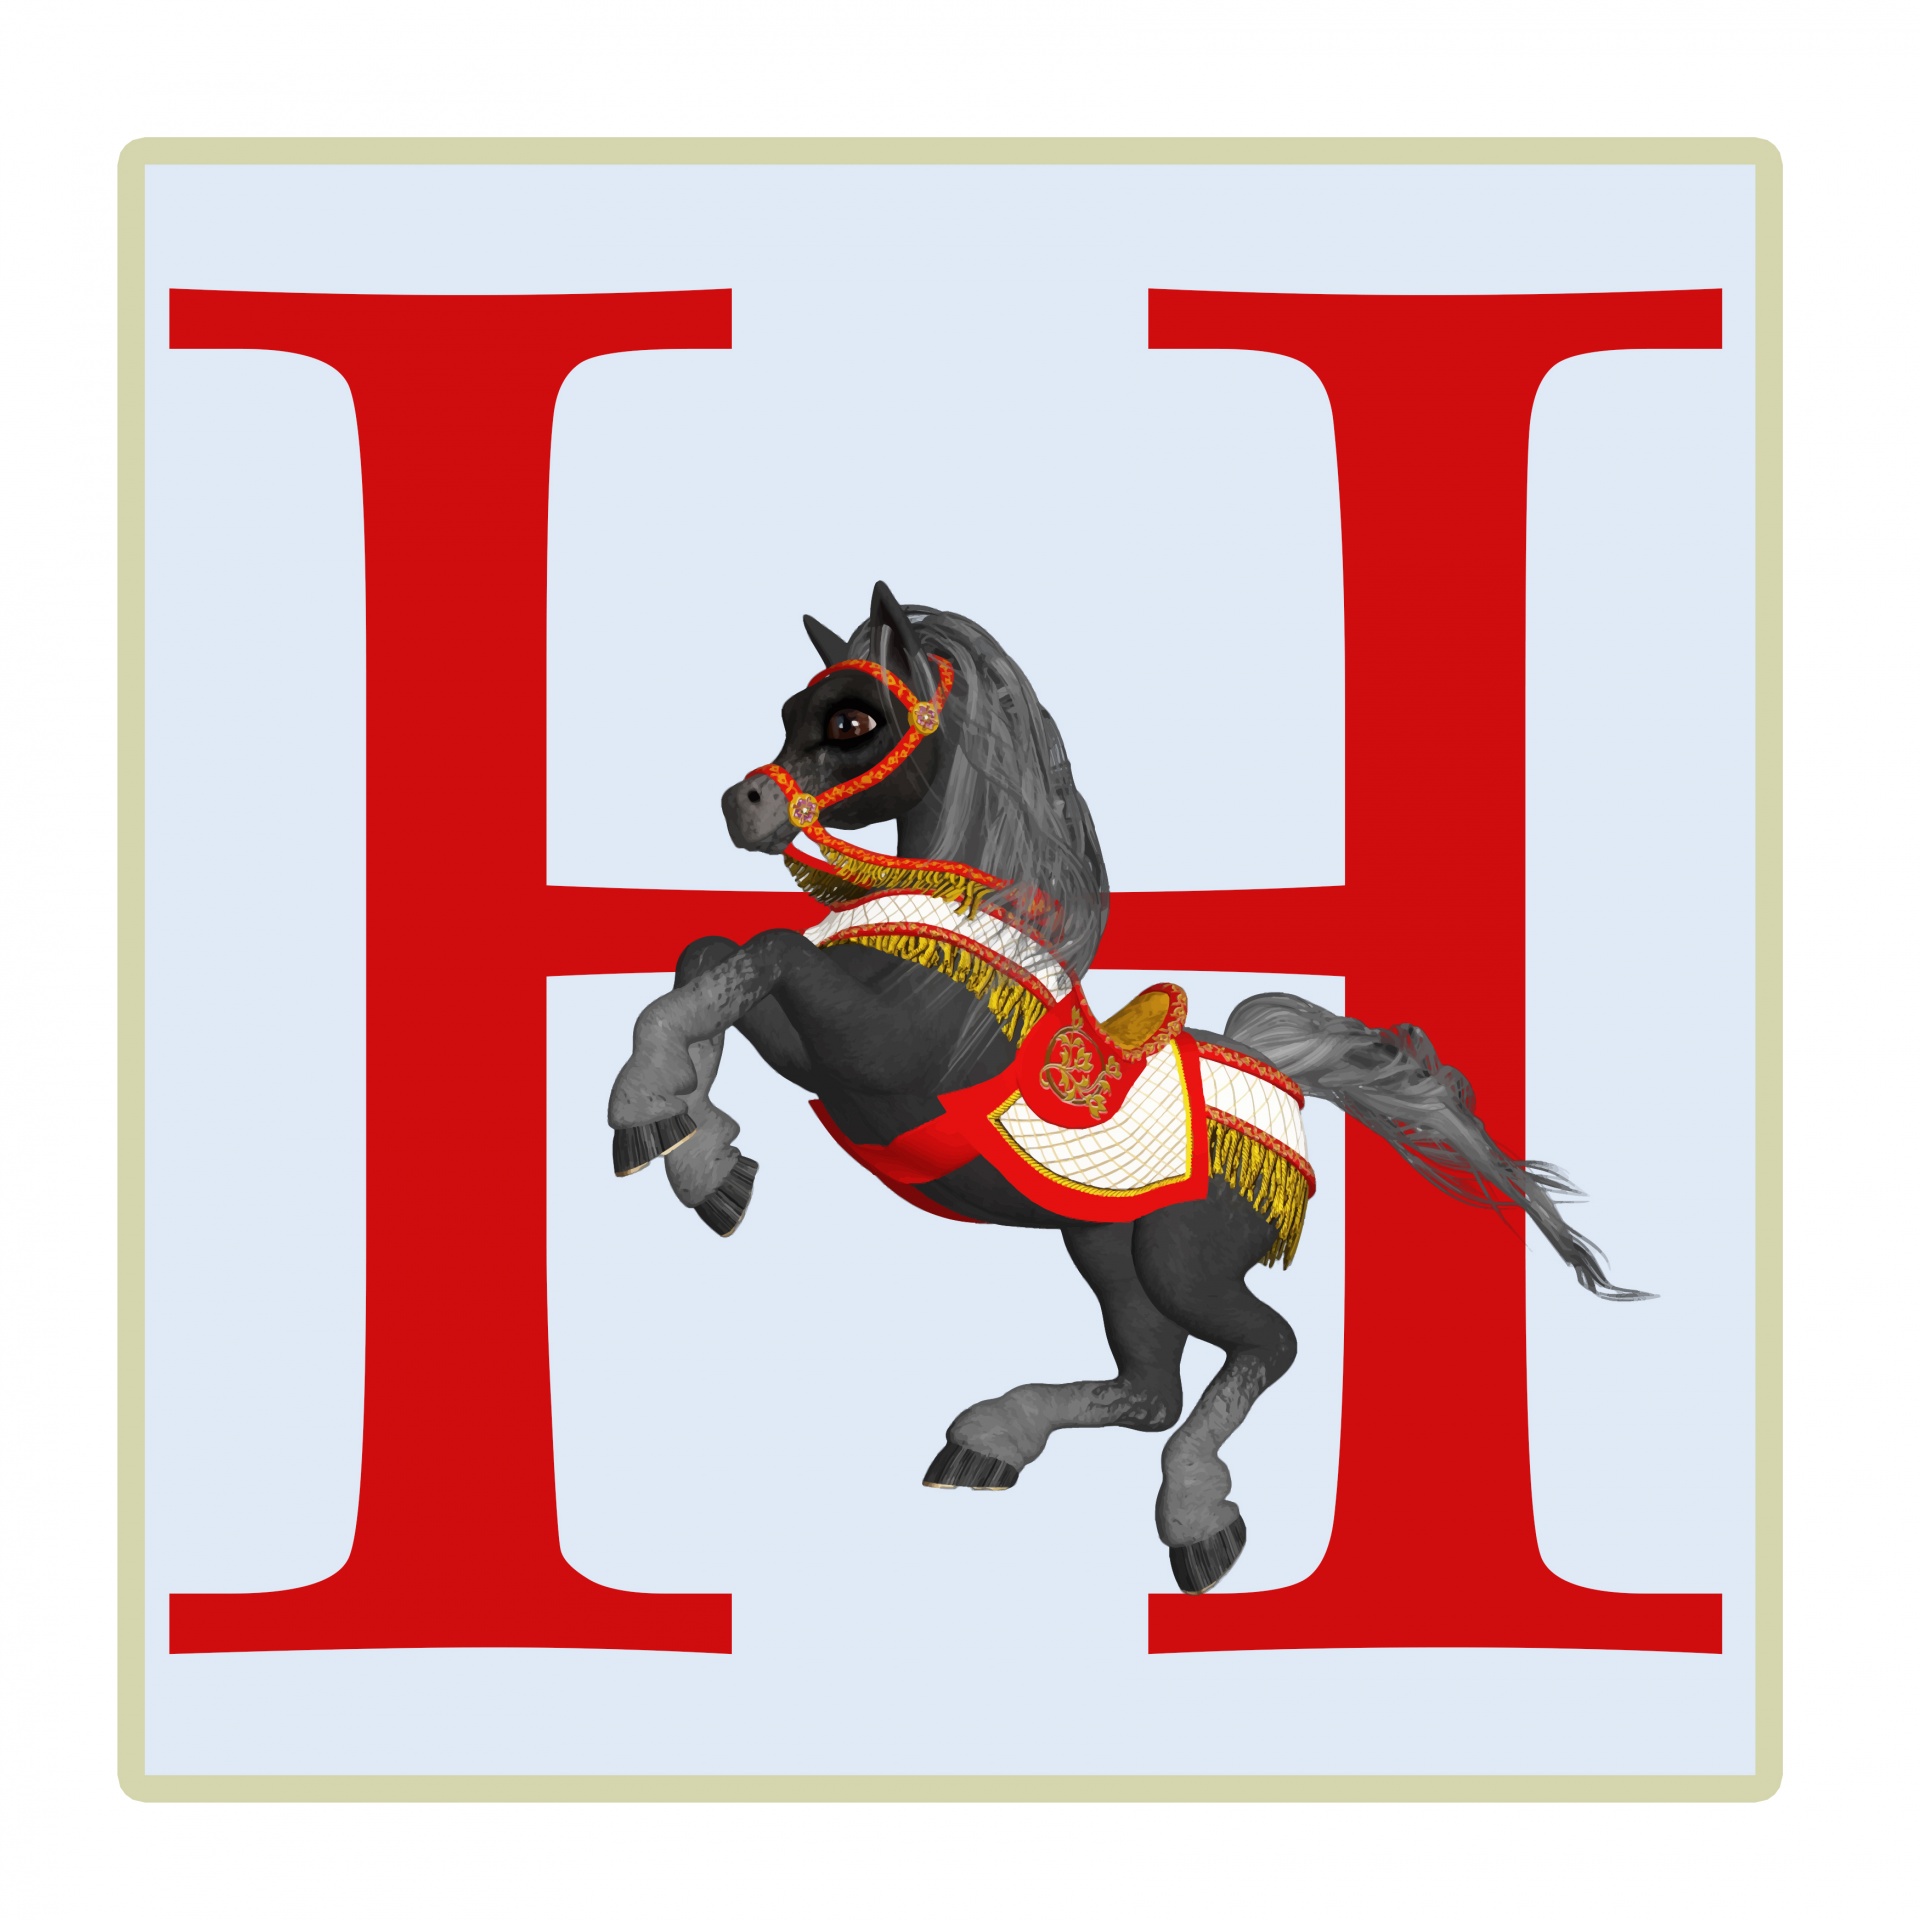 h letter horse free photo